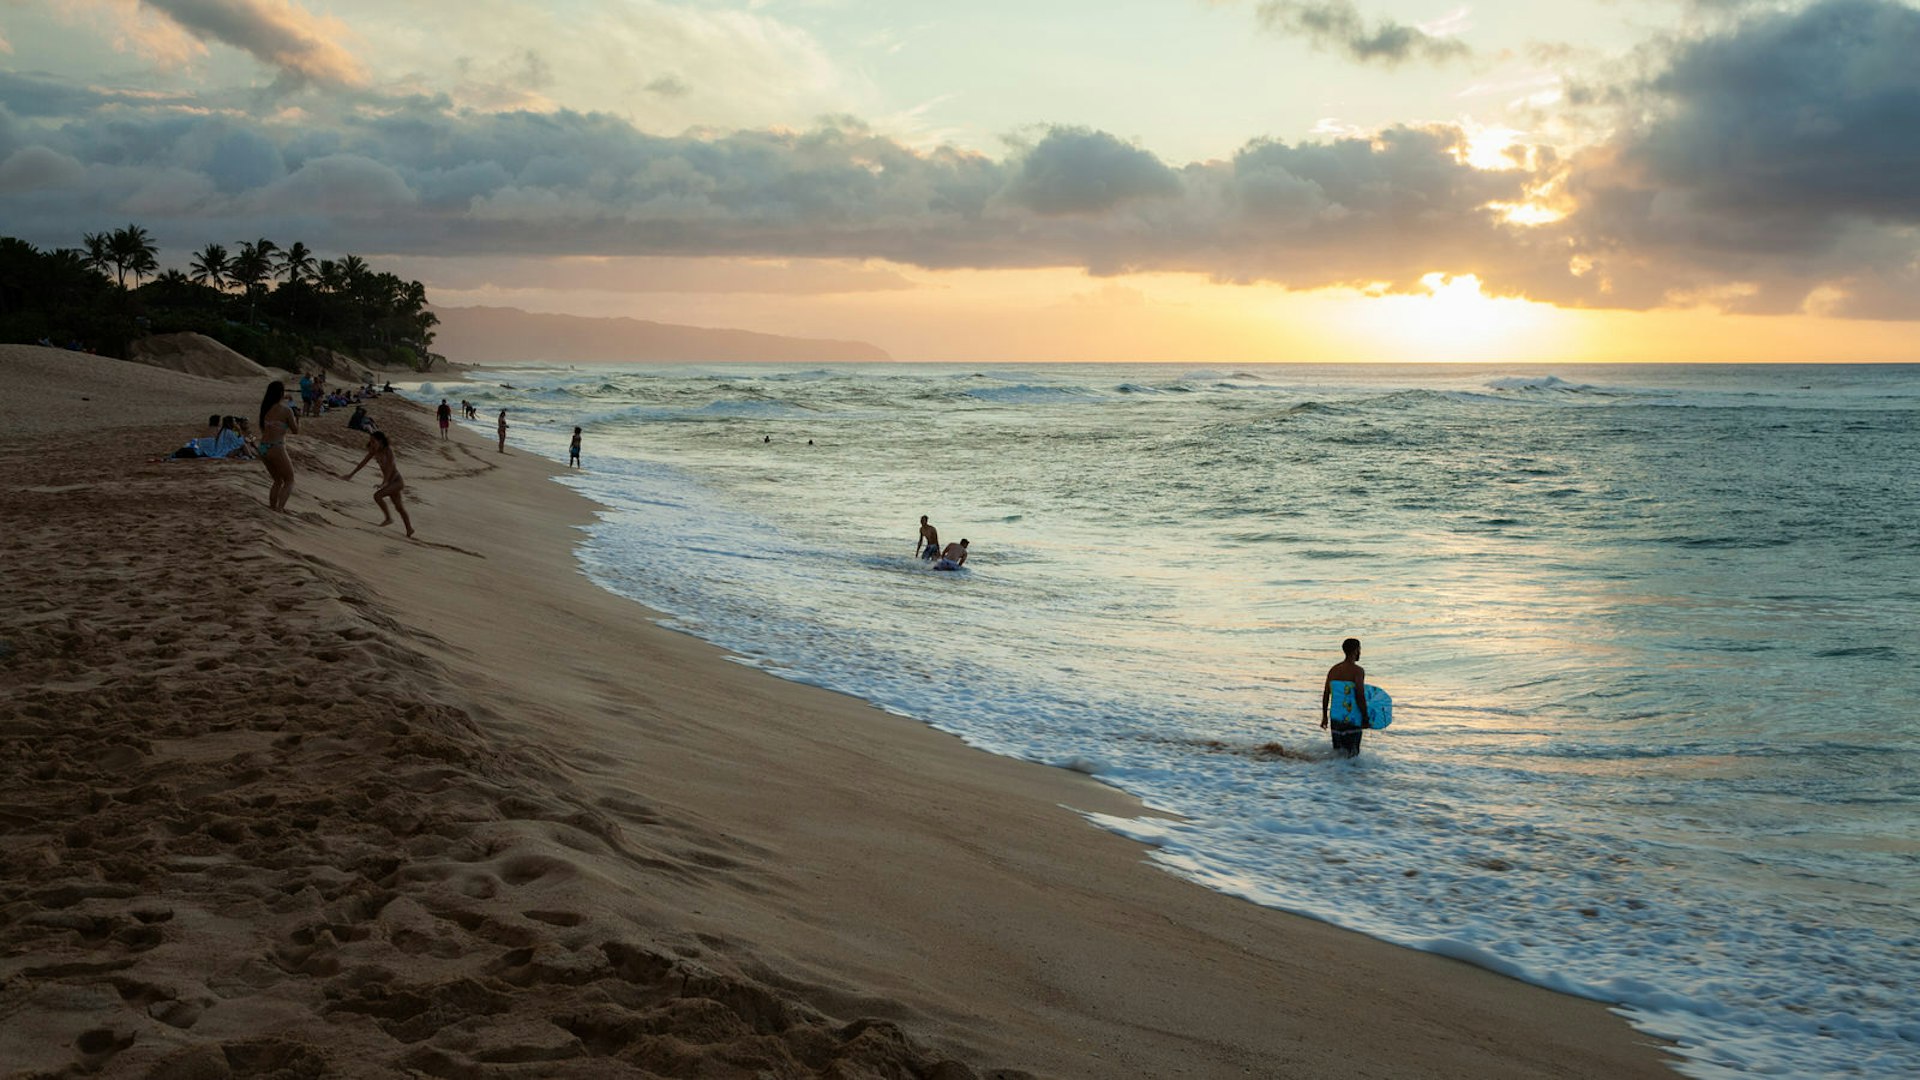 A lone bodyboarder wades into the surf off Oahu, Hawaii © JJM Photography / Shutterstock